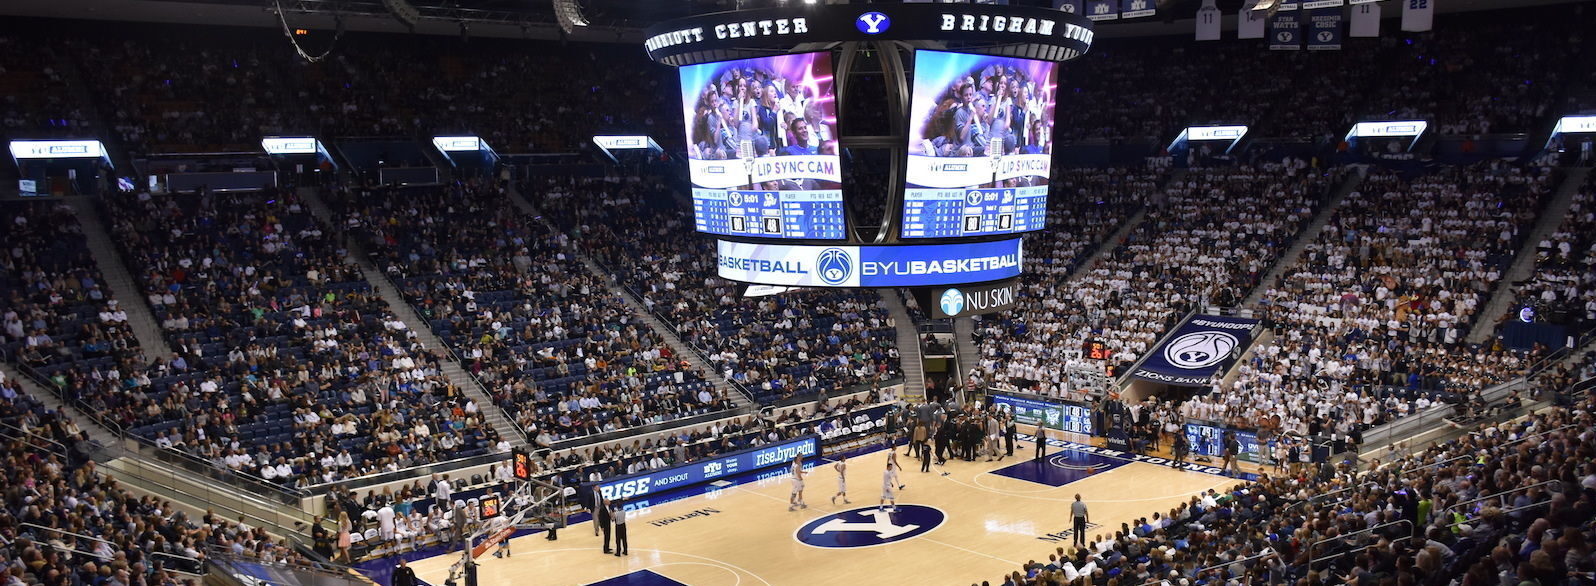 Anthony James Partners, AJP, Brigham Young University, BYU, High-density Wi-Fi, WiFi, DAS, WiFi/DAS, Aruba Wi-Fi, in-game app, Marriott Center, arena, College Sports, collegiate sports, basketball, led display, videoboard, video board, scoreboard, center hung, centerhung, center-hung, NCAA, men’s basketball, intercollegiate, AV Consultant, A/V consultant, Owner’s Representative, scoreboard, LED displays, Broadcast Cabling, Infrastructure Cabling, Control Room, Arena Audio, Arena Sound Reinforcement, Stadium Sound Reinforcement, College Football, Cougars, BYU Cougars, Lavell Edwards, High Density Wi-Fi